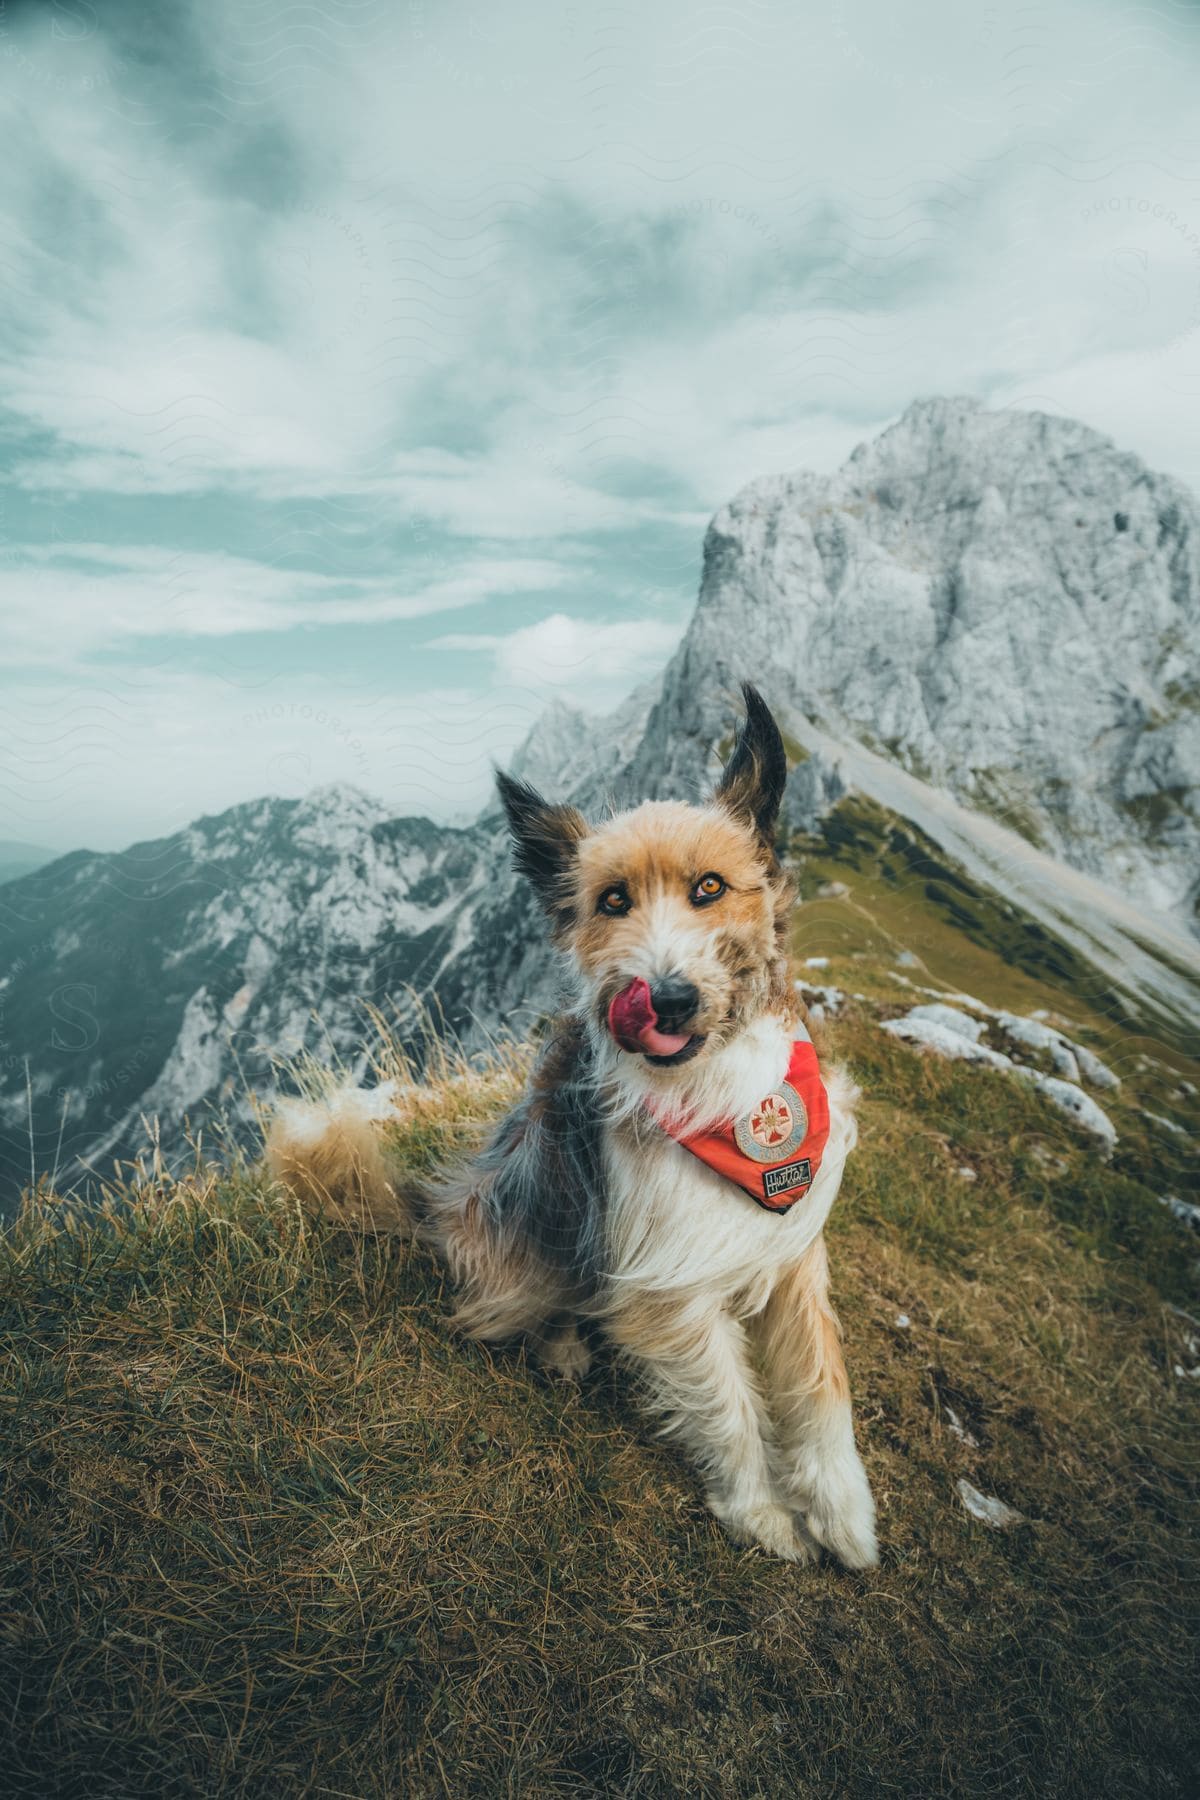 A view of a dog hiking up in the mountains